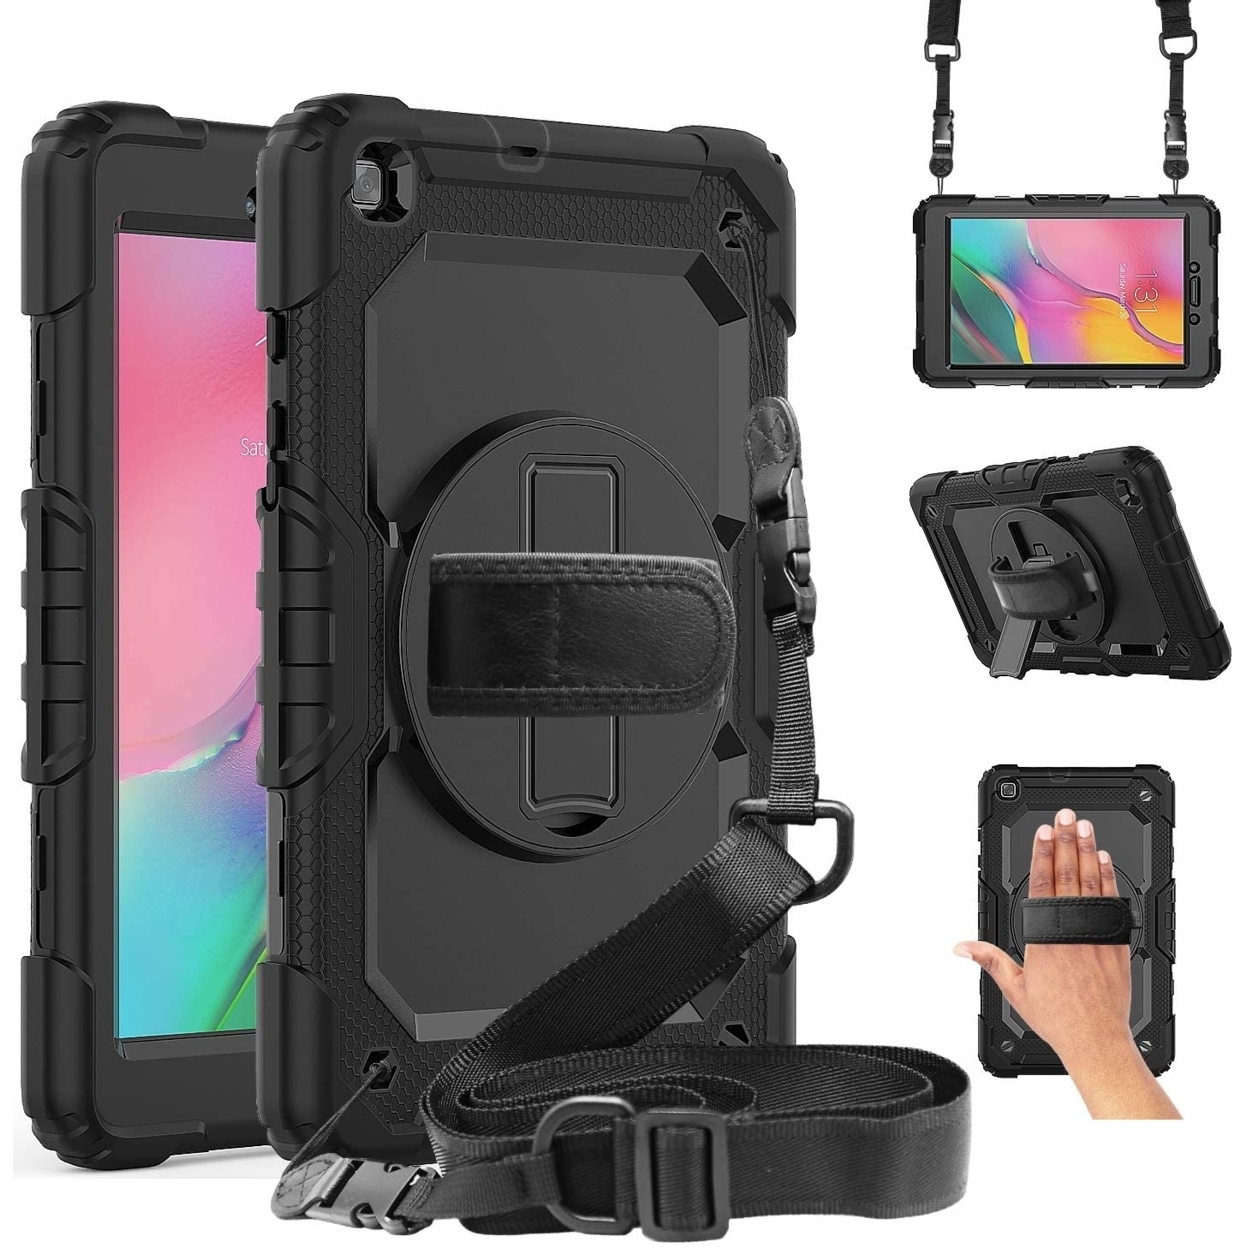 Modes Wireless For Samsung Galaxy Tab A 8.0 2019 / T290 / T295 Shockproof Protective 360 Rotating Stand W. Strap Tablet Case Cover Black/Black